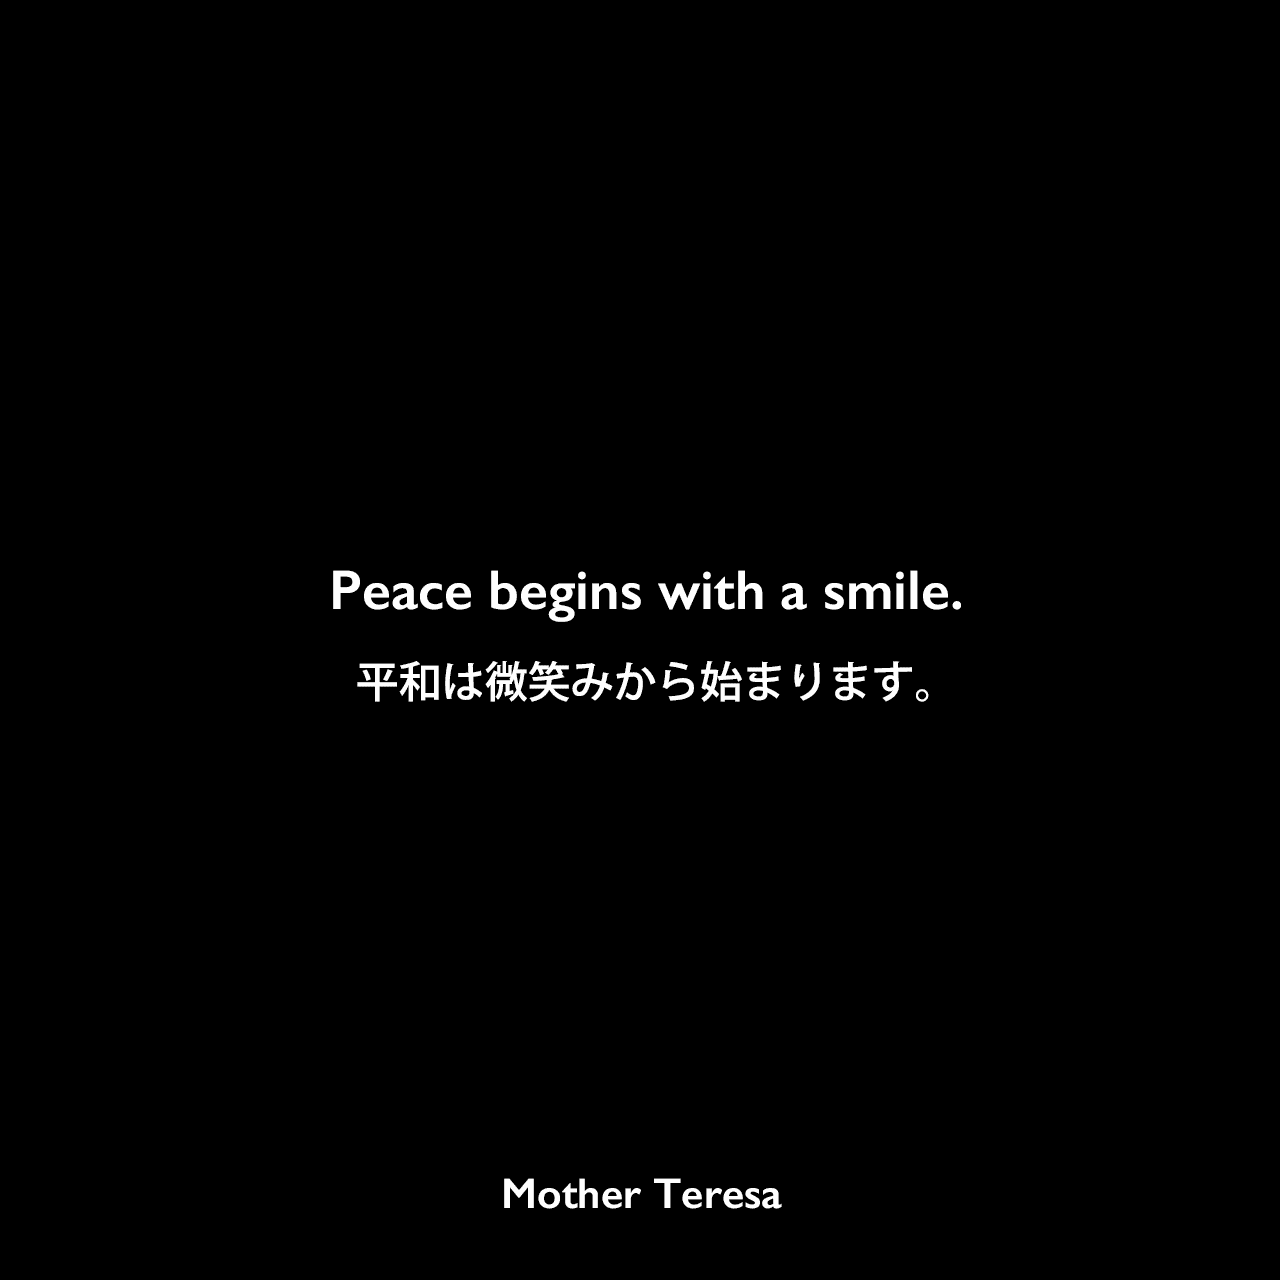 Peace begins with a smile.平和は微笑みから始まります。